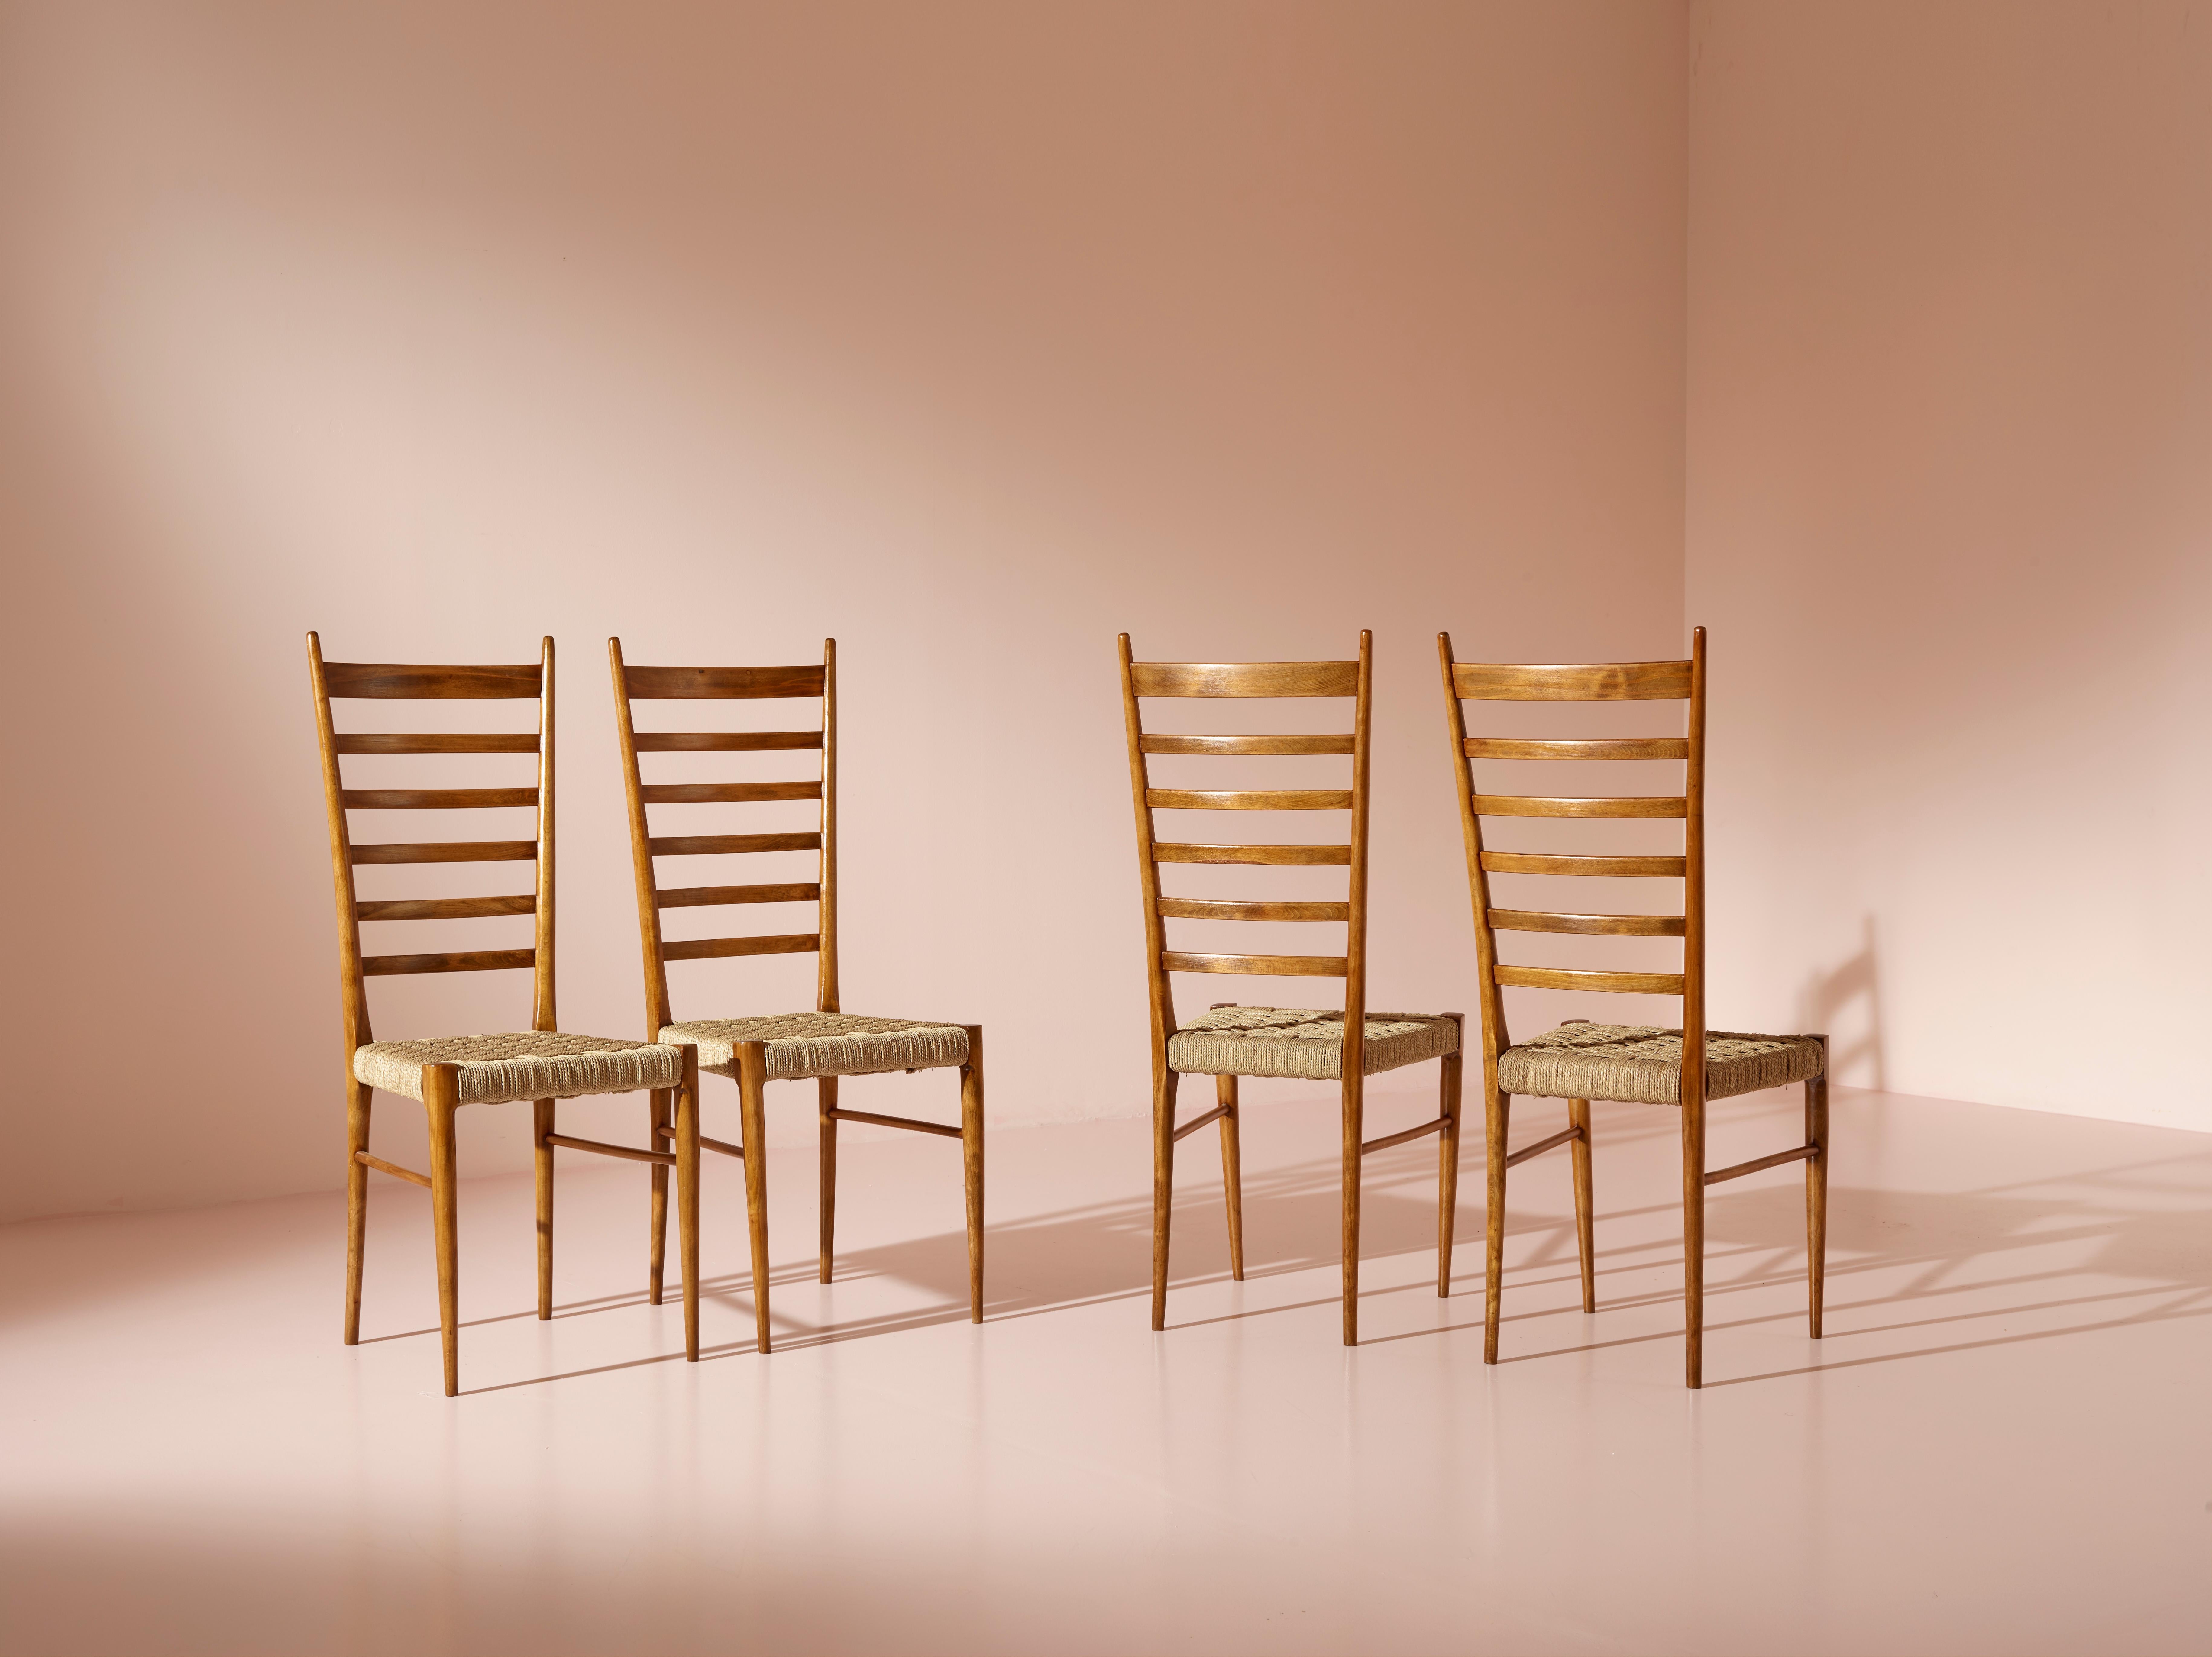 Colombo Sanguineti set of two ''Sei Stecche'' chairs, Chiavari, Italy, 1950s For Sale 6